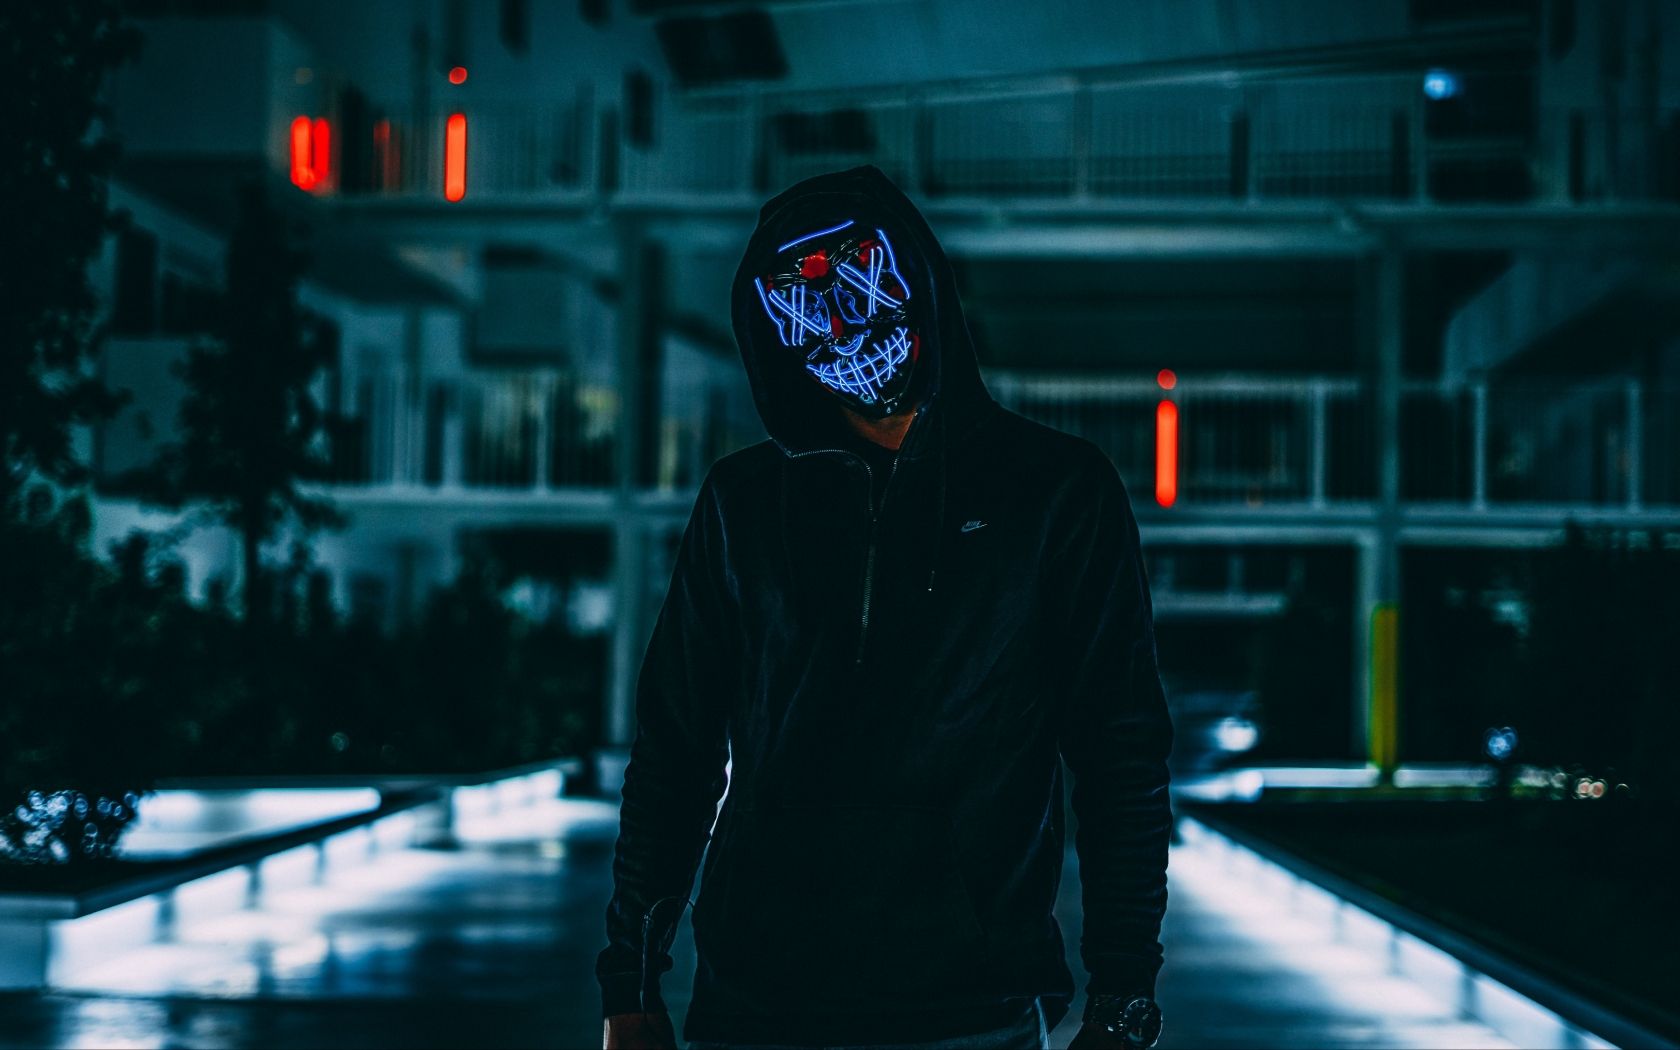 Free download Download wallpaper 3840x2160 mask anonymous hood darkness neon [3840x2160] for your Desktop, Mobile & Tablet. Explore Neon Mask Wallpaper. Neon Mask Wallpaper, Mask Wallpaper, Tuxedo Mask Wallpaper